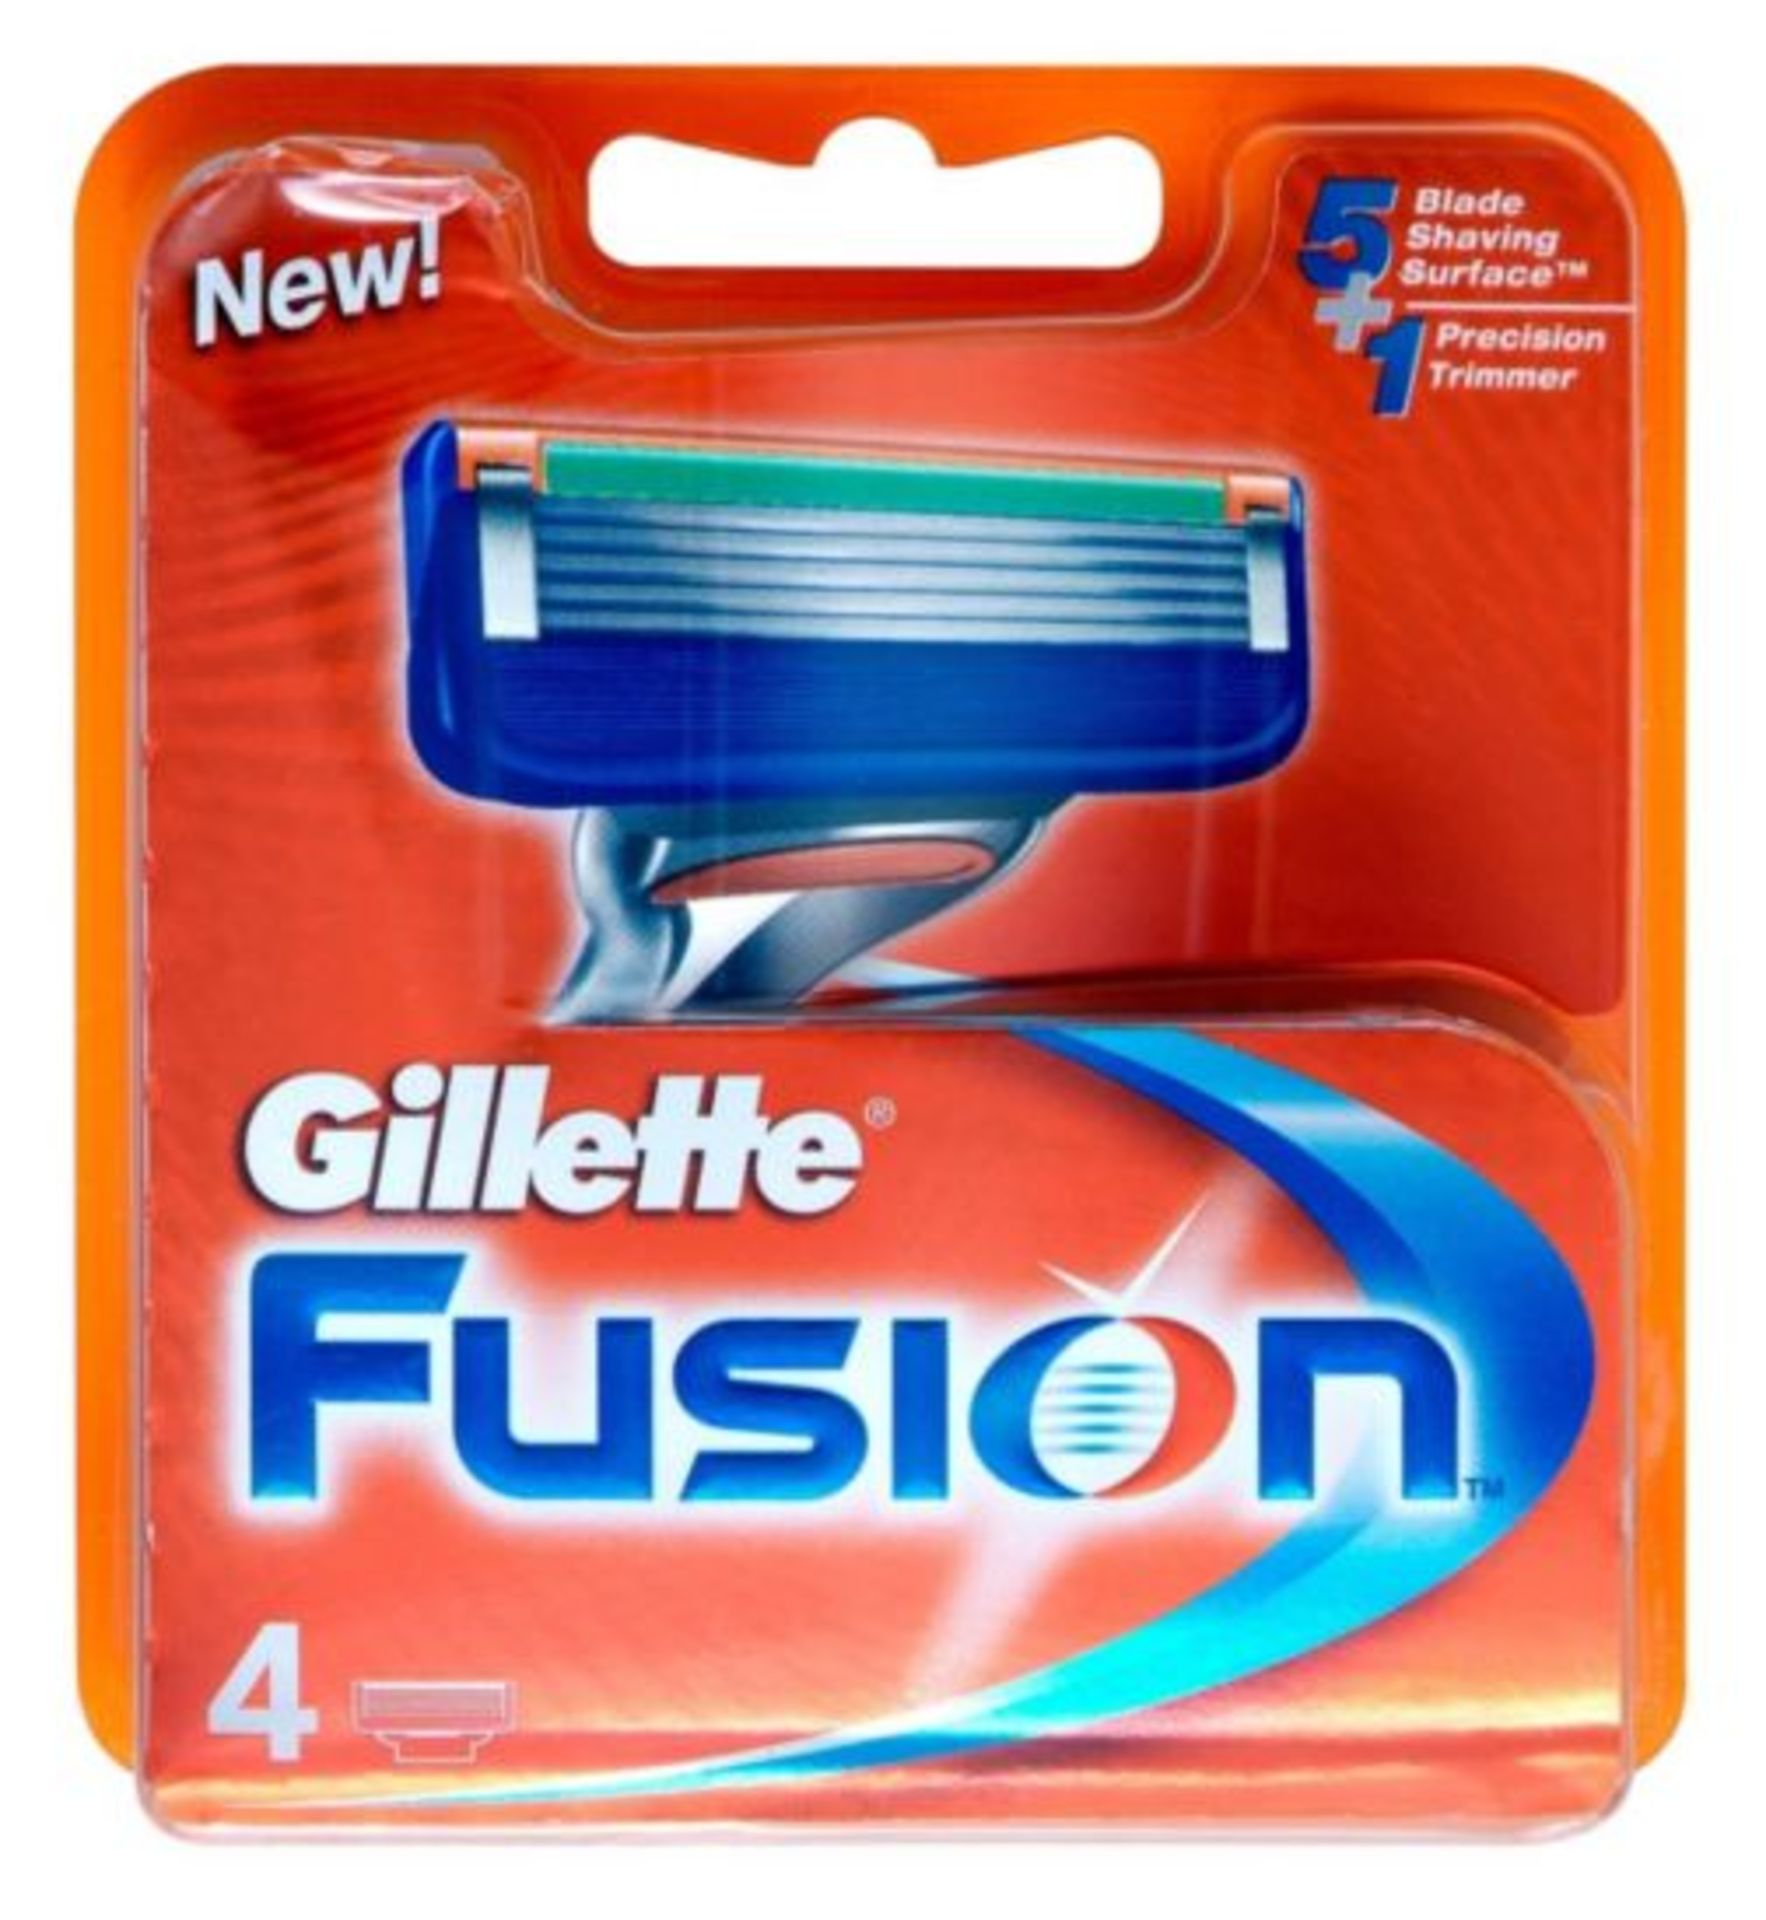 V Brand New Gillette Fusion Razor Blades 4 Pack RRP: £13.98 X 10  Bid price to be multiplied by Ten